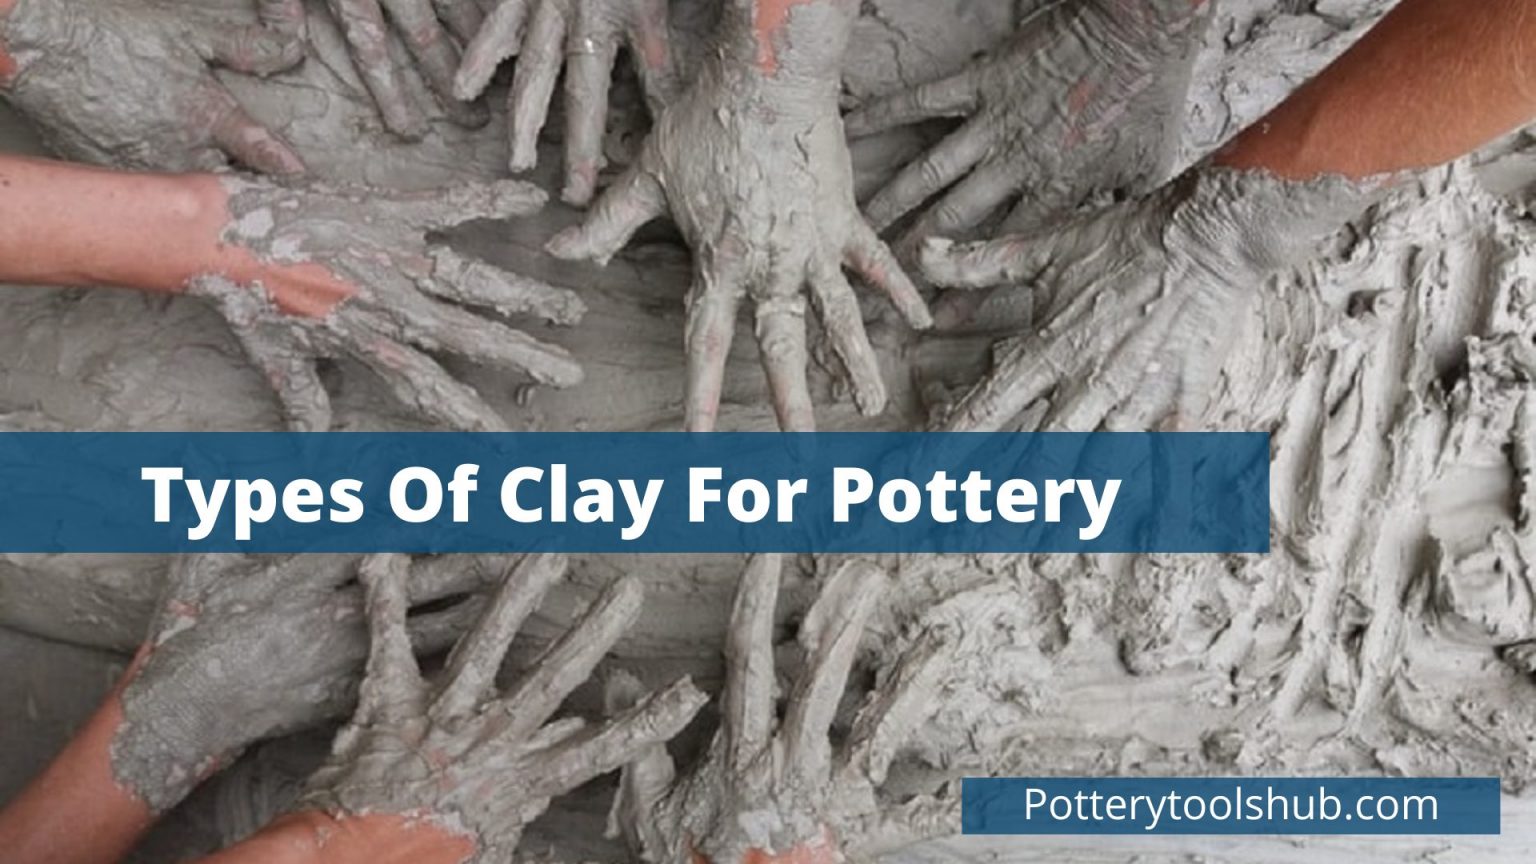 The Types Of Clay For Pottery – Choosing The Best One For You